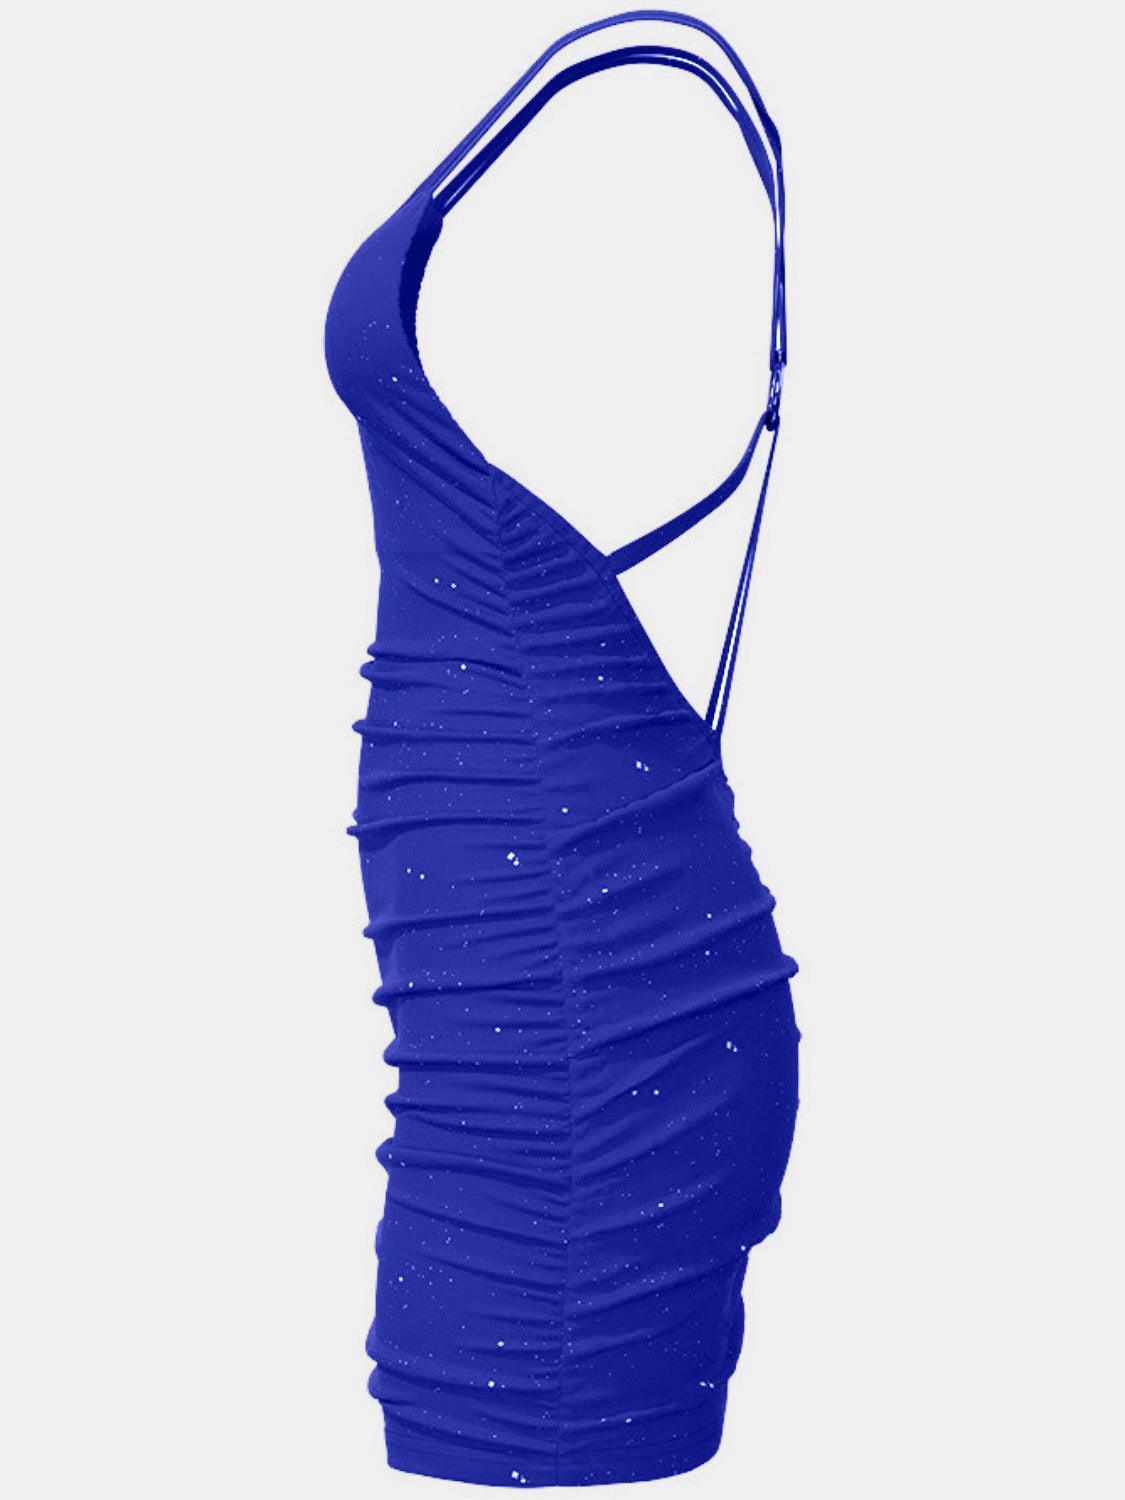 a woman's blue dress on a white background